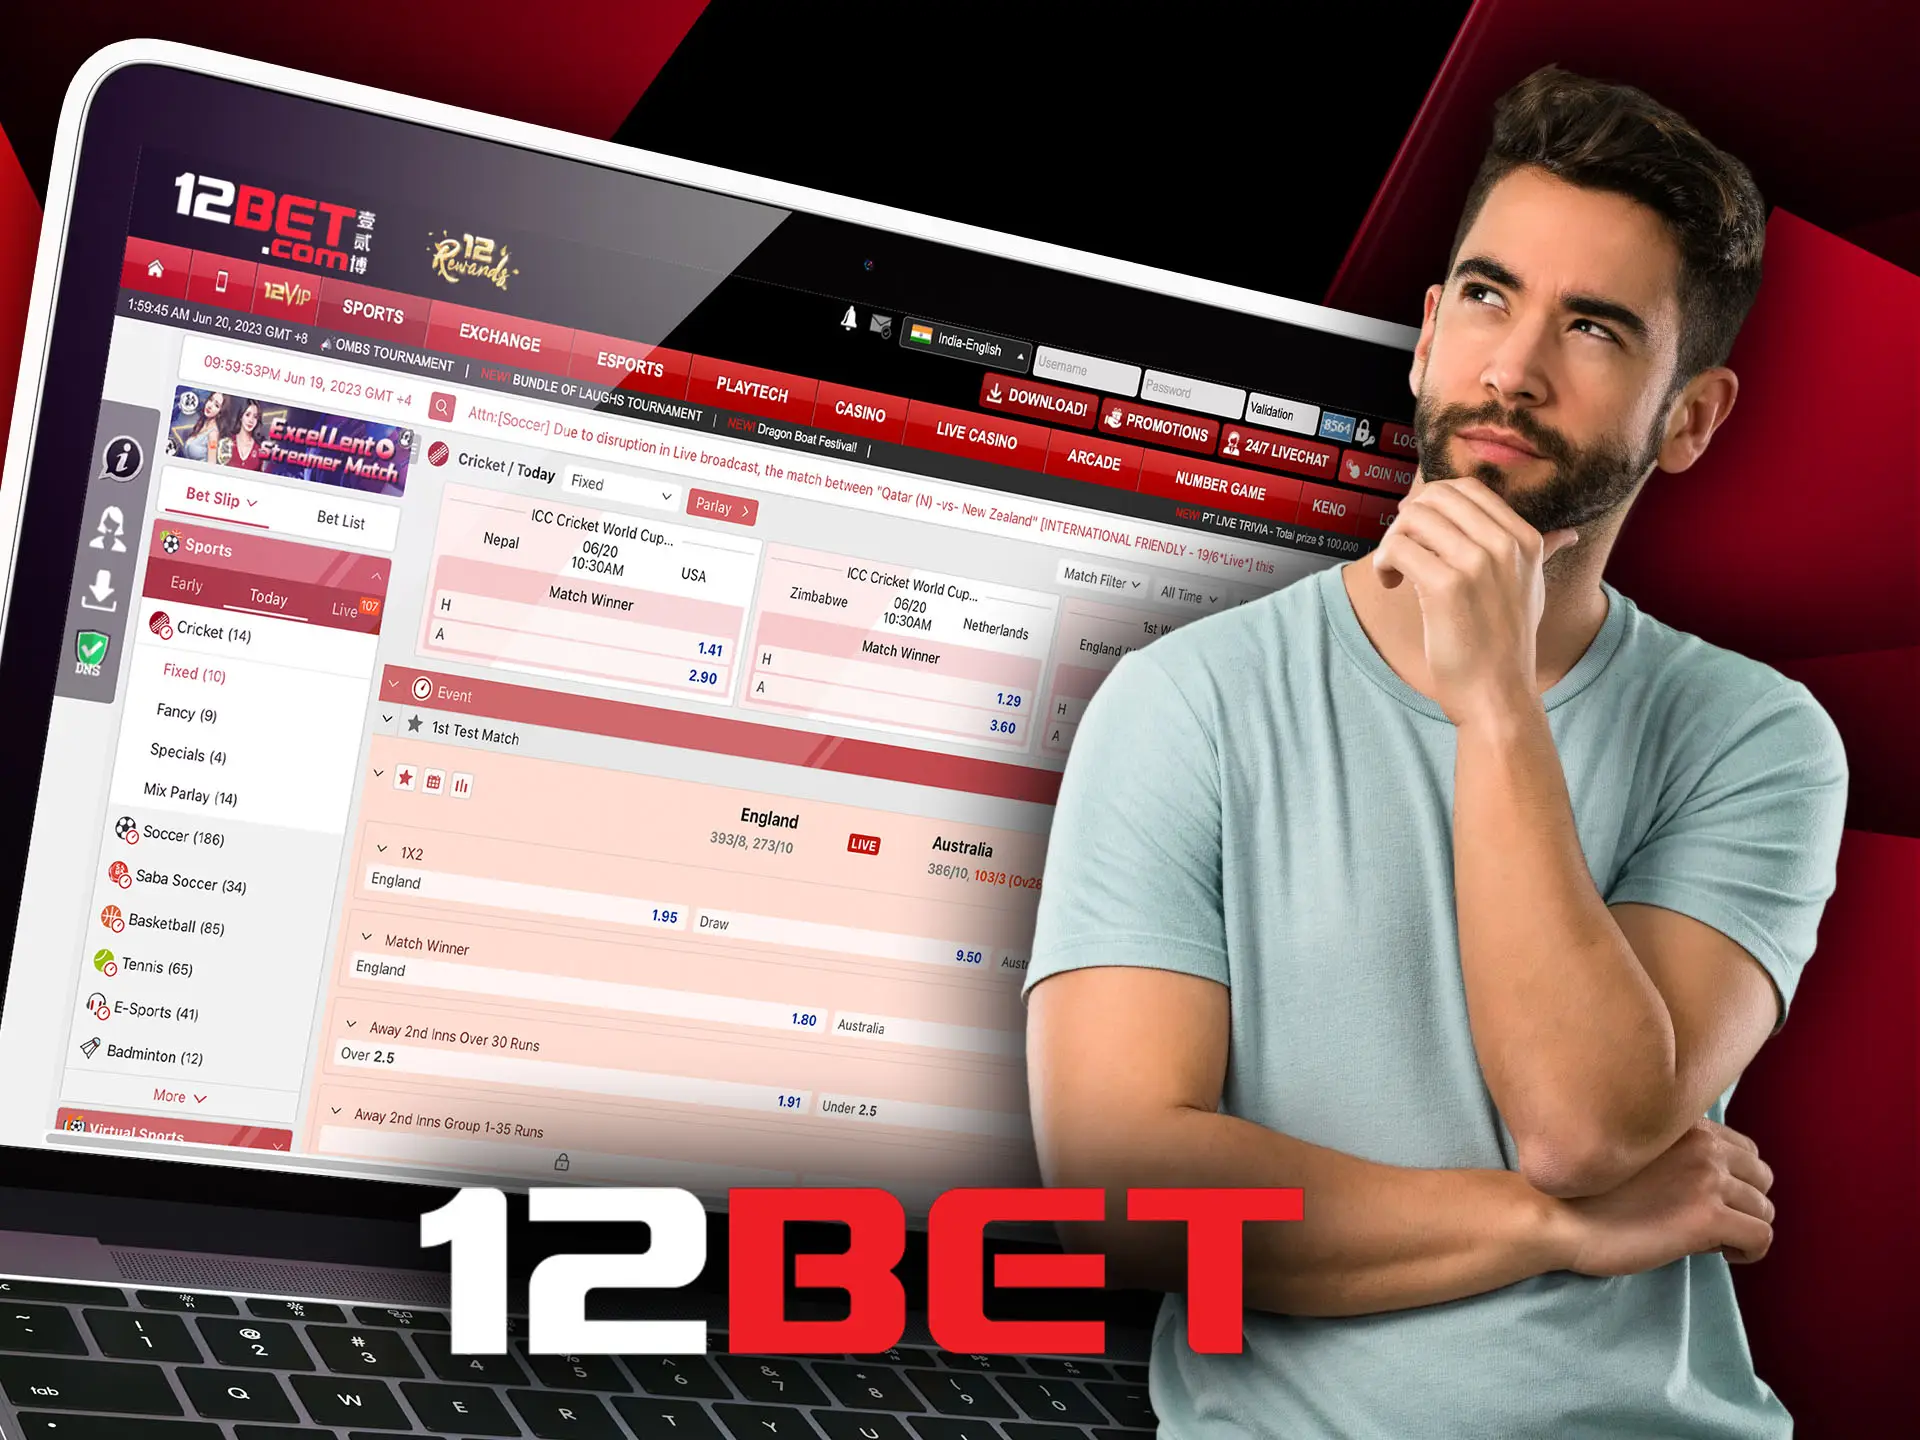 Prevent gaming addiction with a 12bet guide.